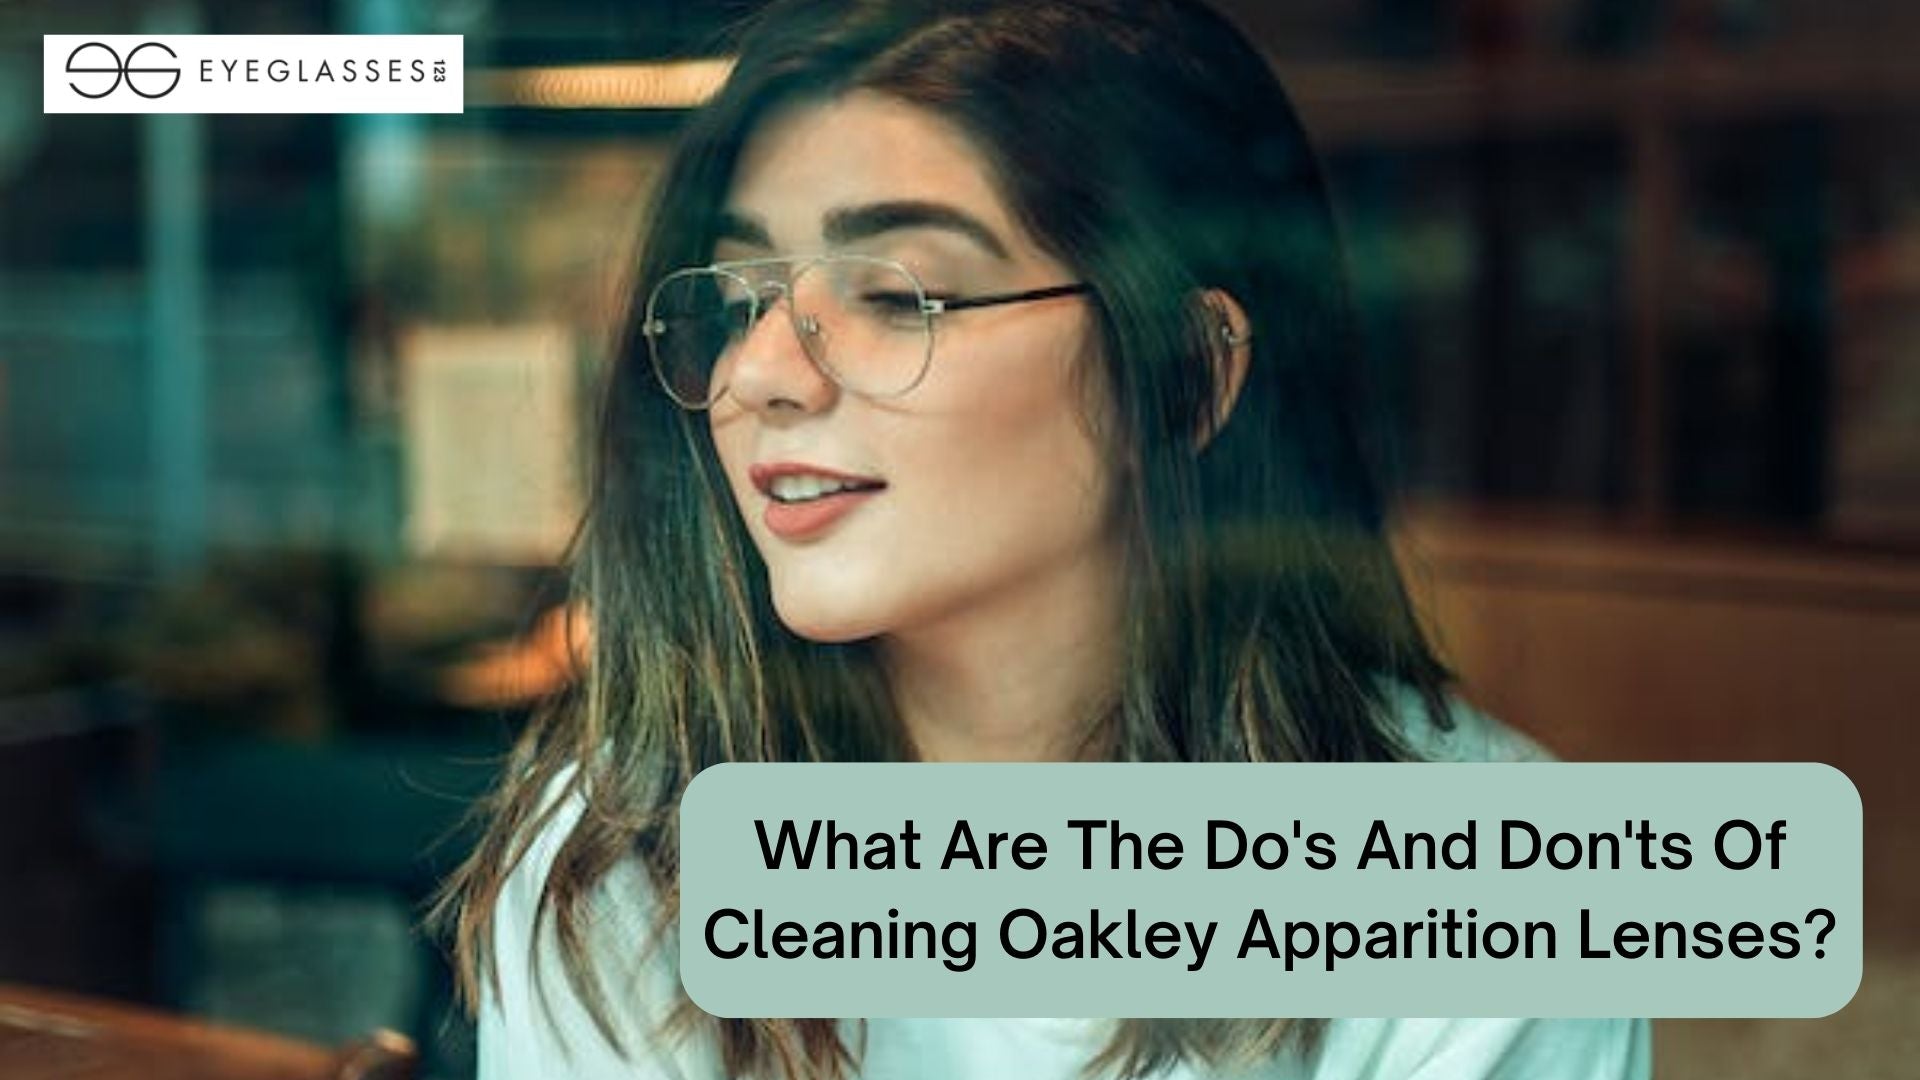 What Are The Do's And Don'ts Of Cleaning Oakley Apparition Lenses?